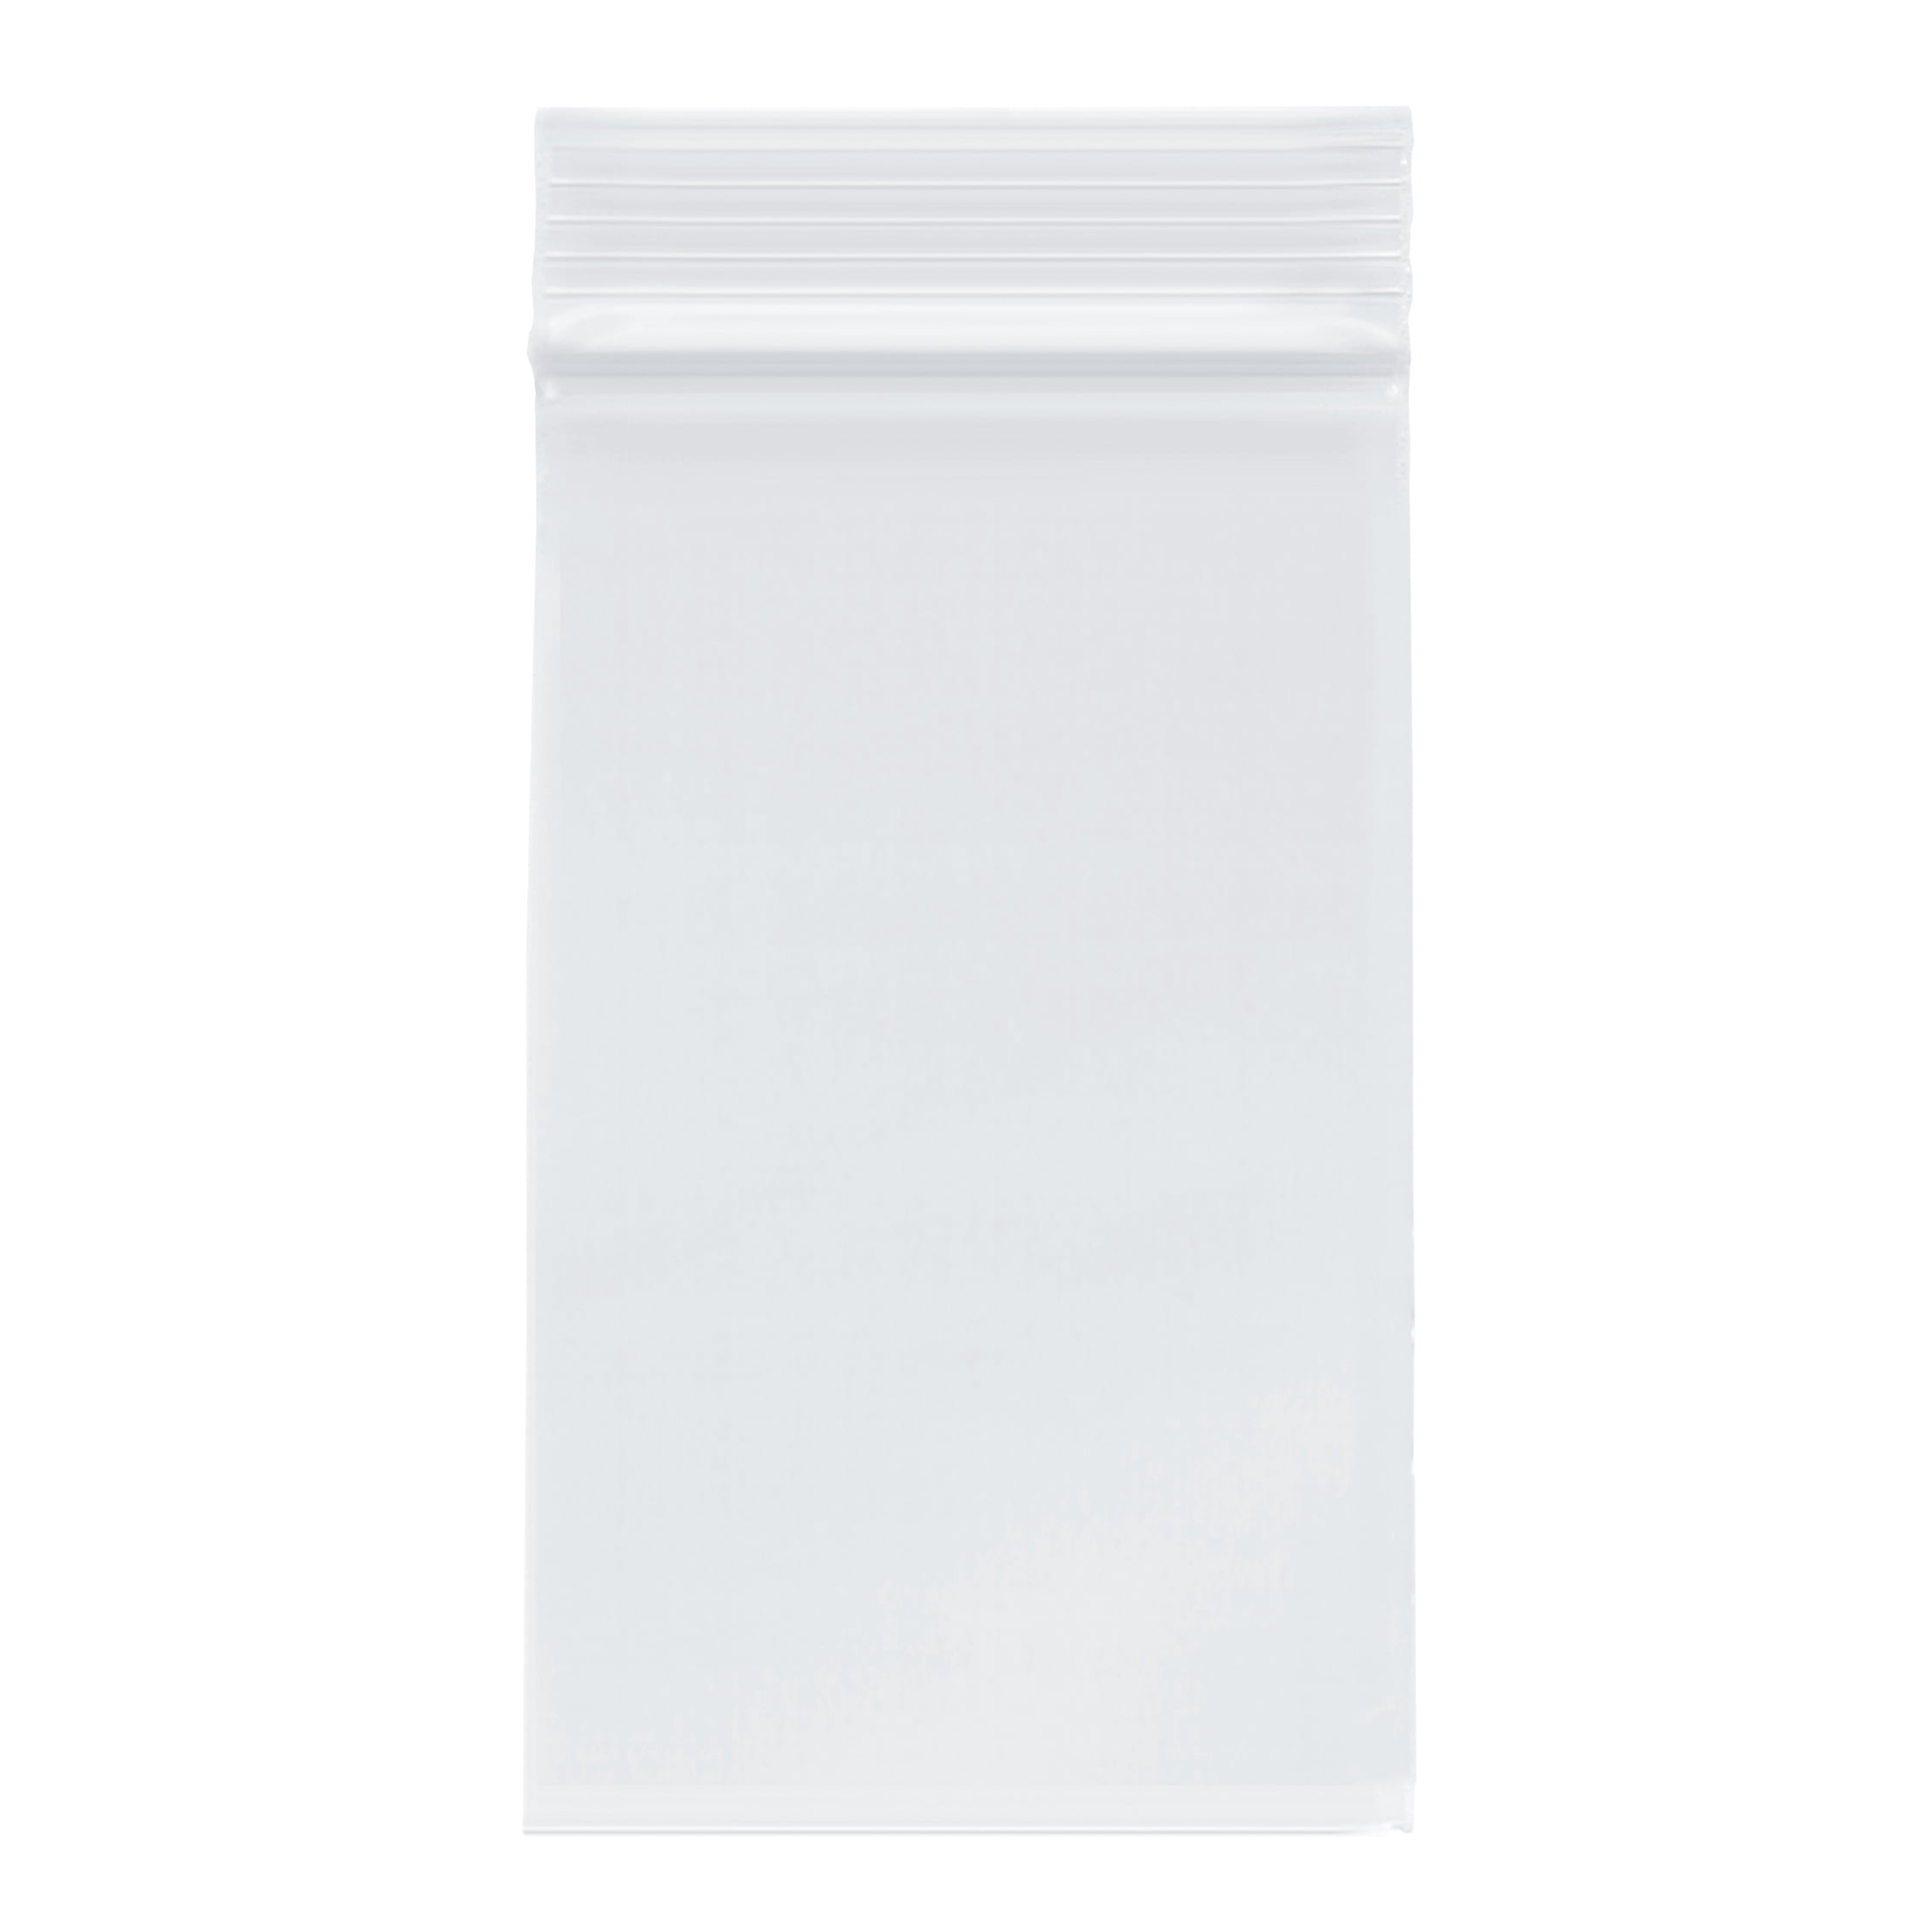 Clear White Block Plastic Reclosable Single Zip Poly Bag 3x5-2 mil 200 Pack 